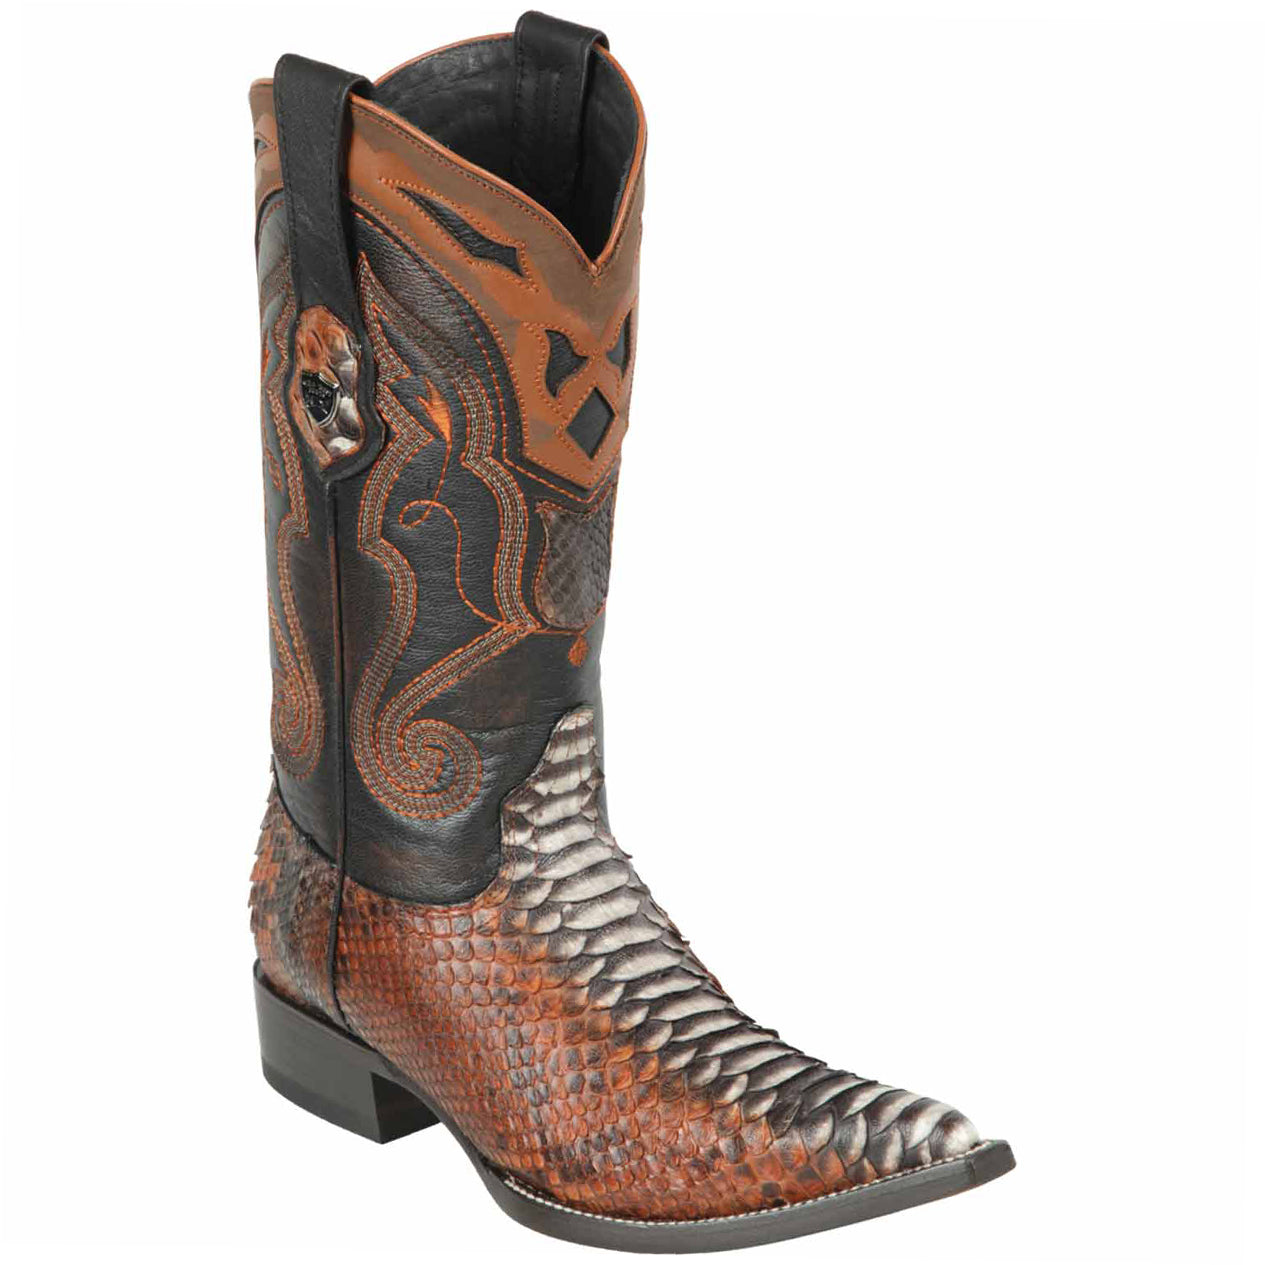 Rustic Cognac Natural Python Snakeskin Cowboy Boots - Pointy Toe